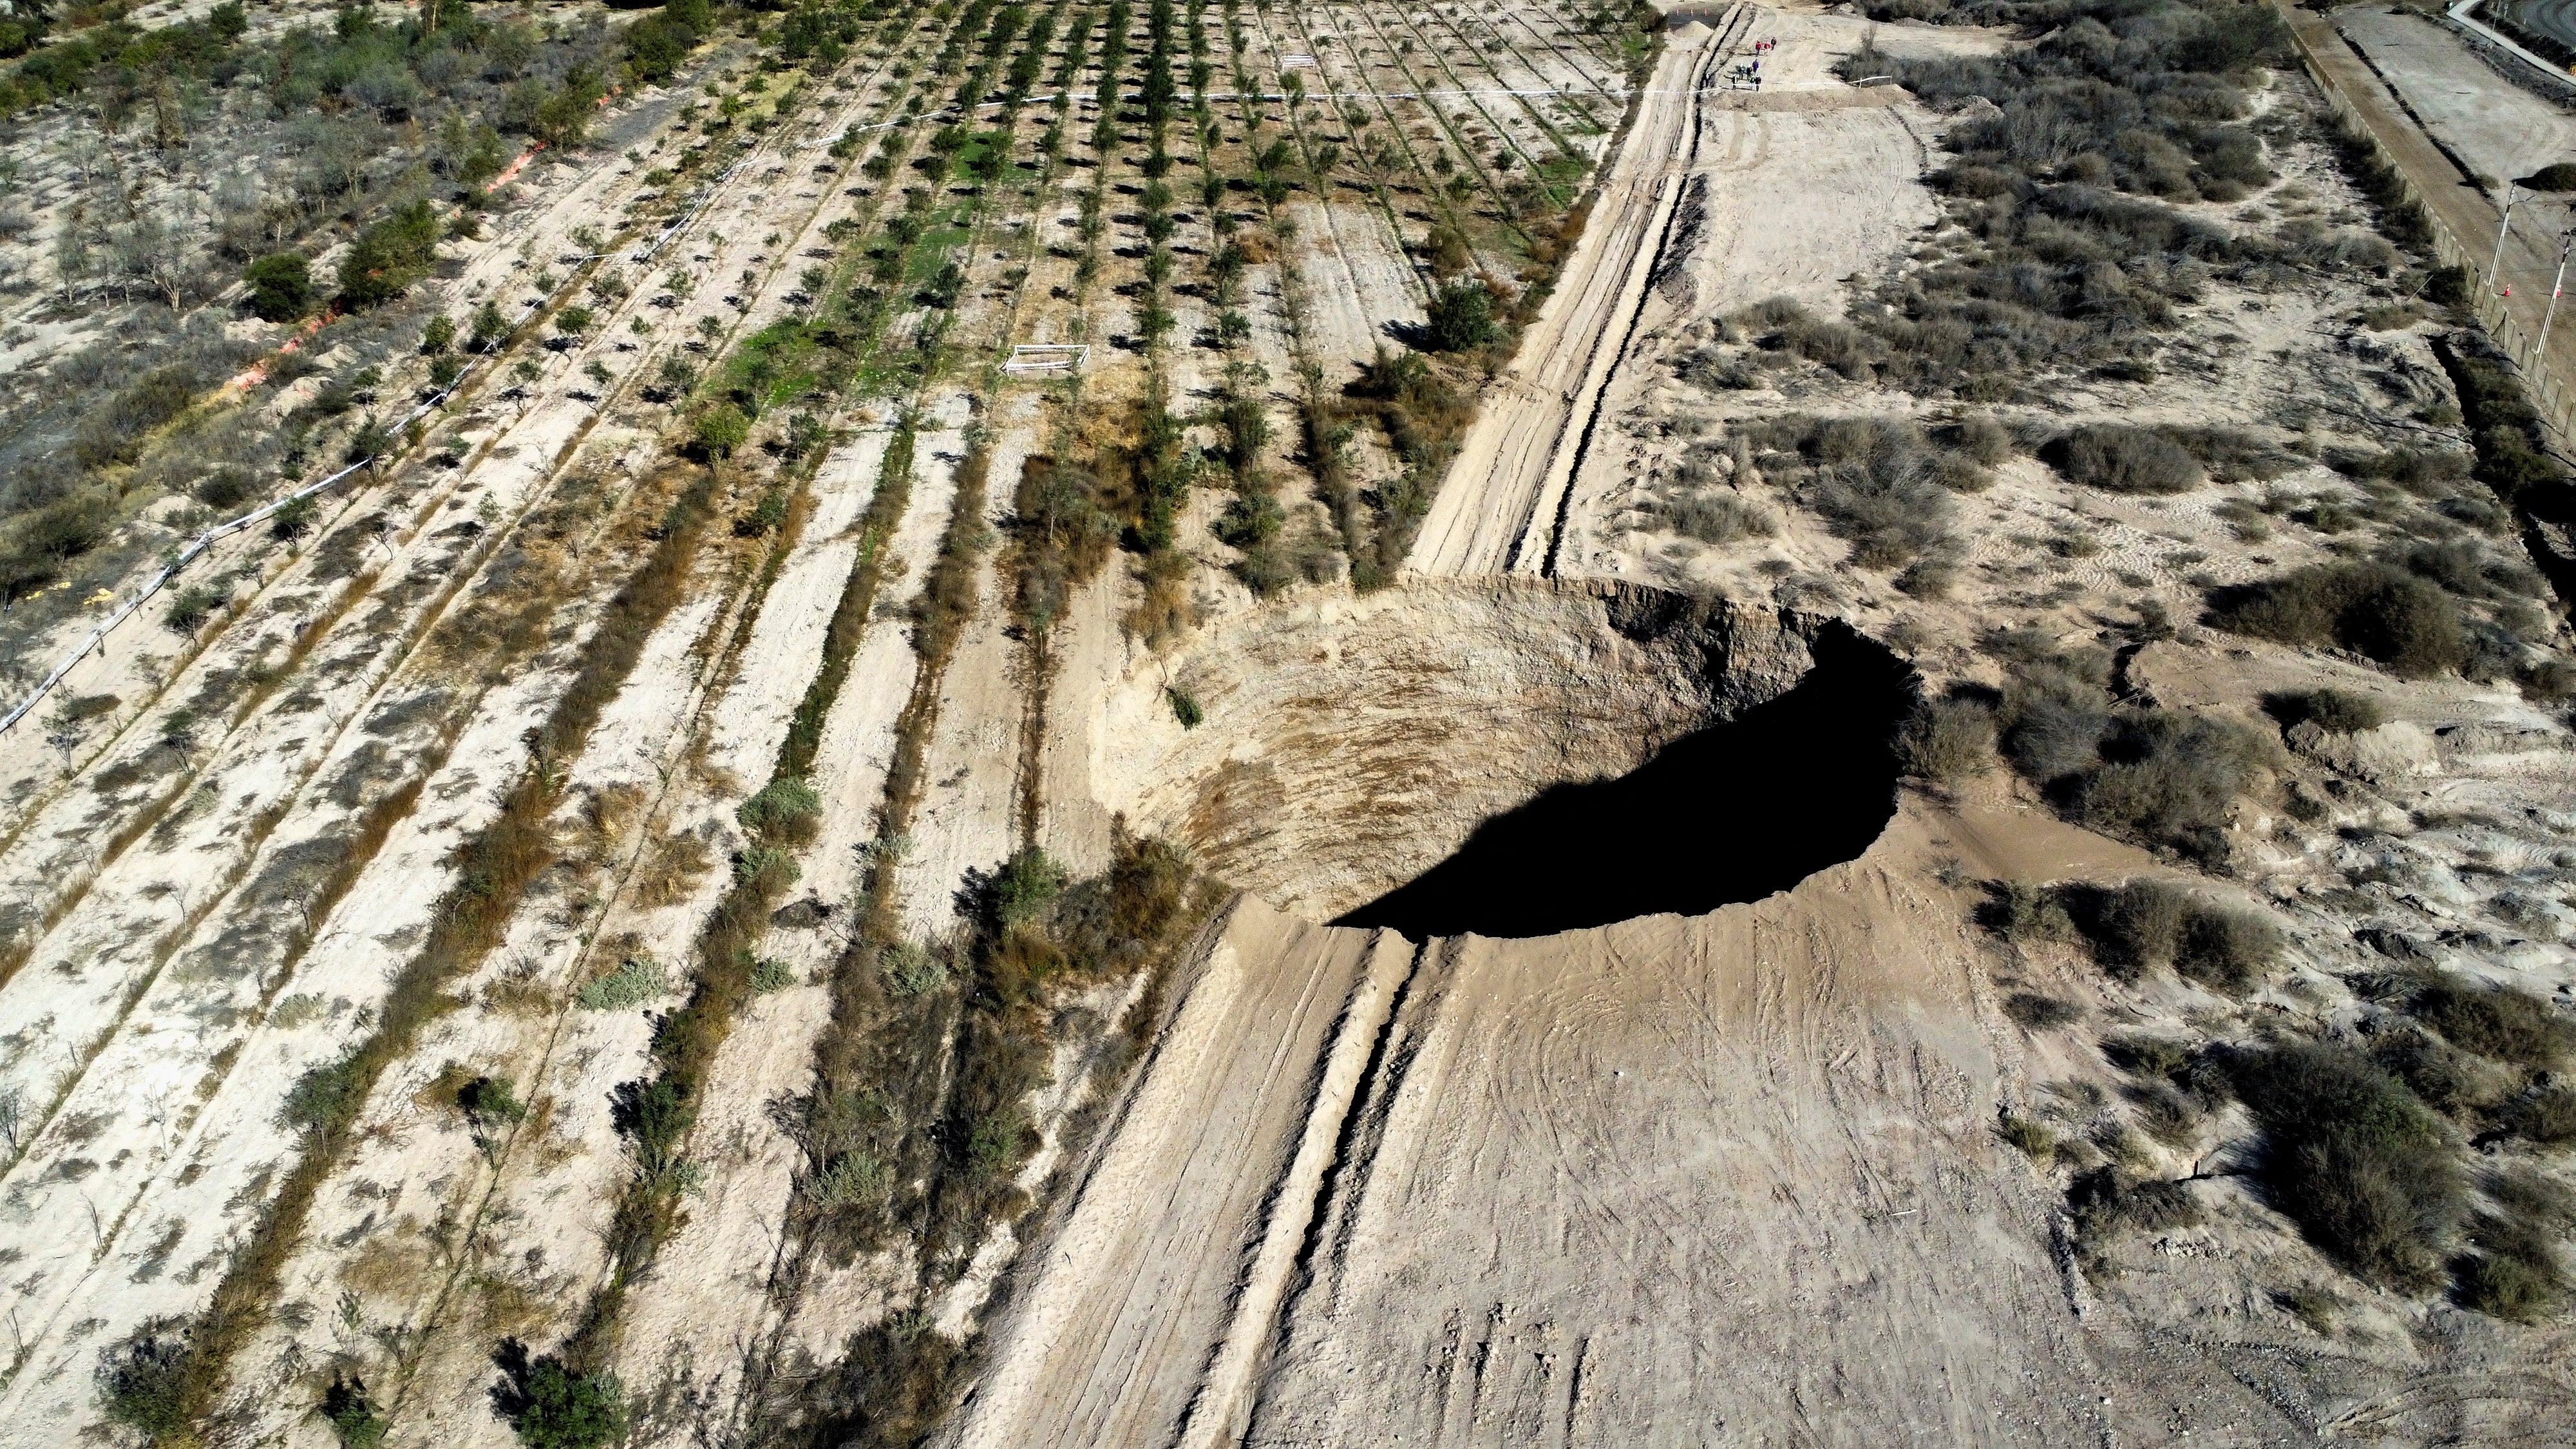 Aeriel view of the sinkhole exposed at mining zone close to Tierra Amarilla town in Copiapo, Chile